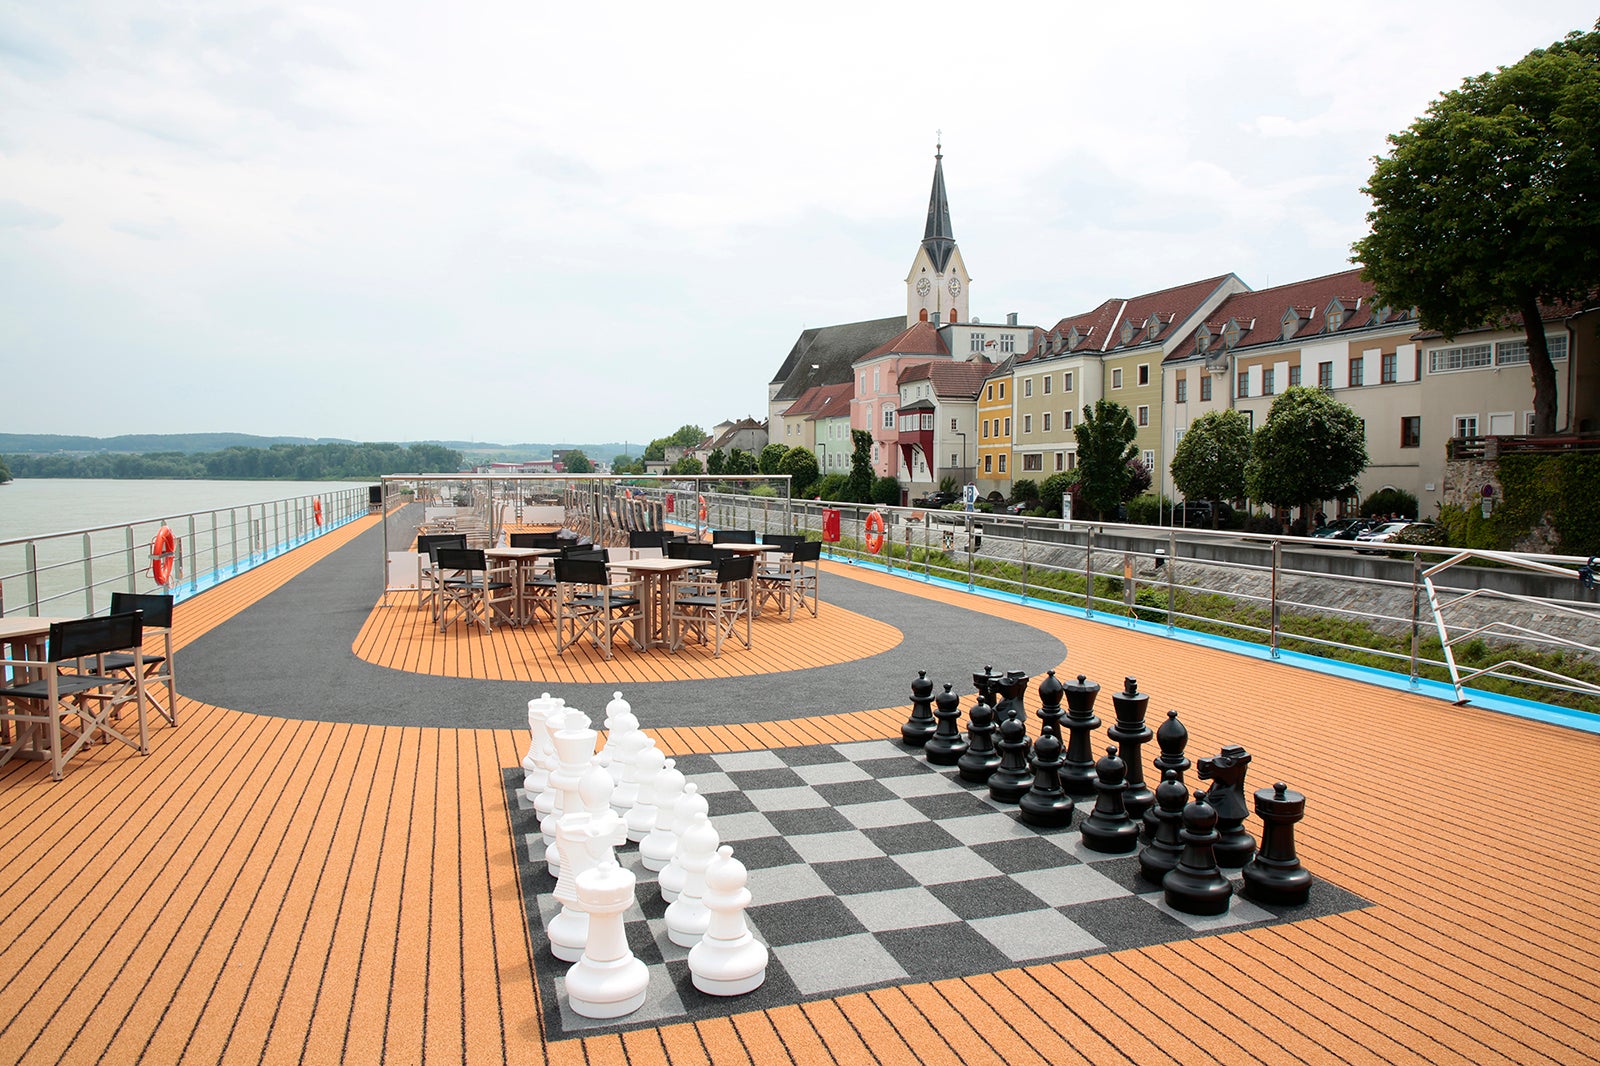 Giant chess set and seating area on AmaLea river ship's top deck